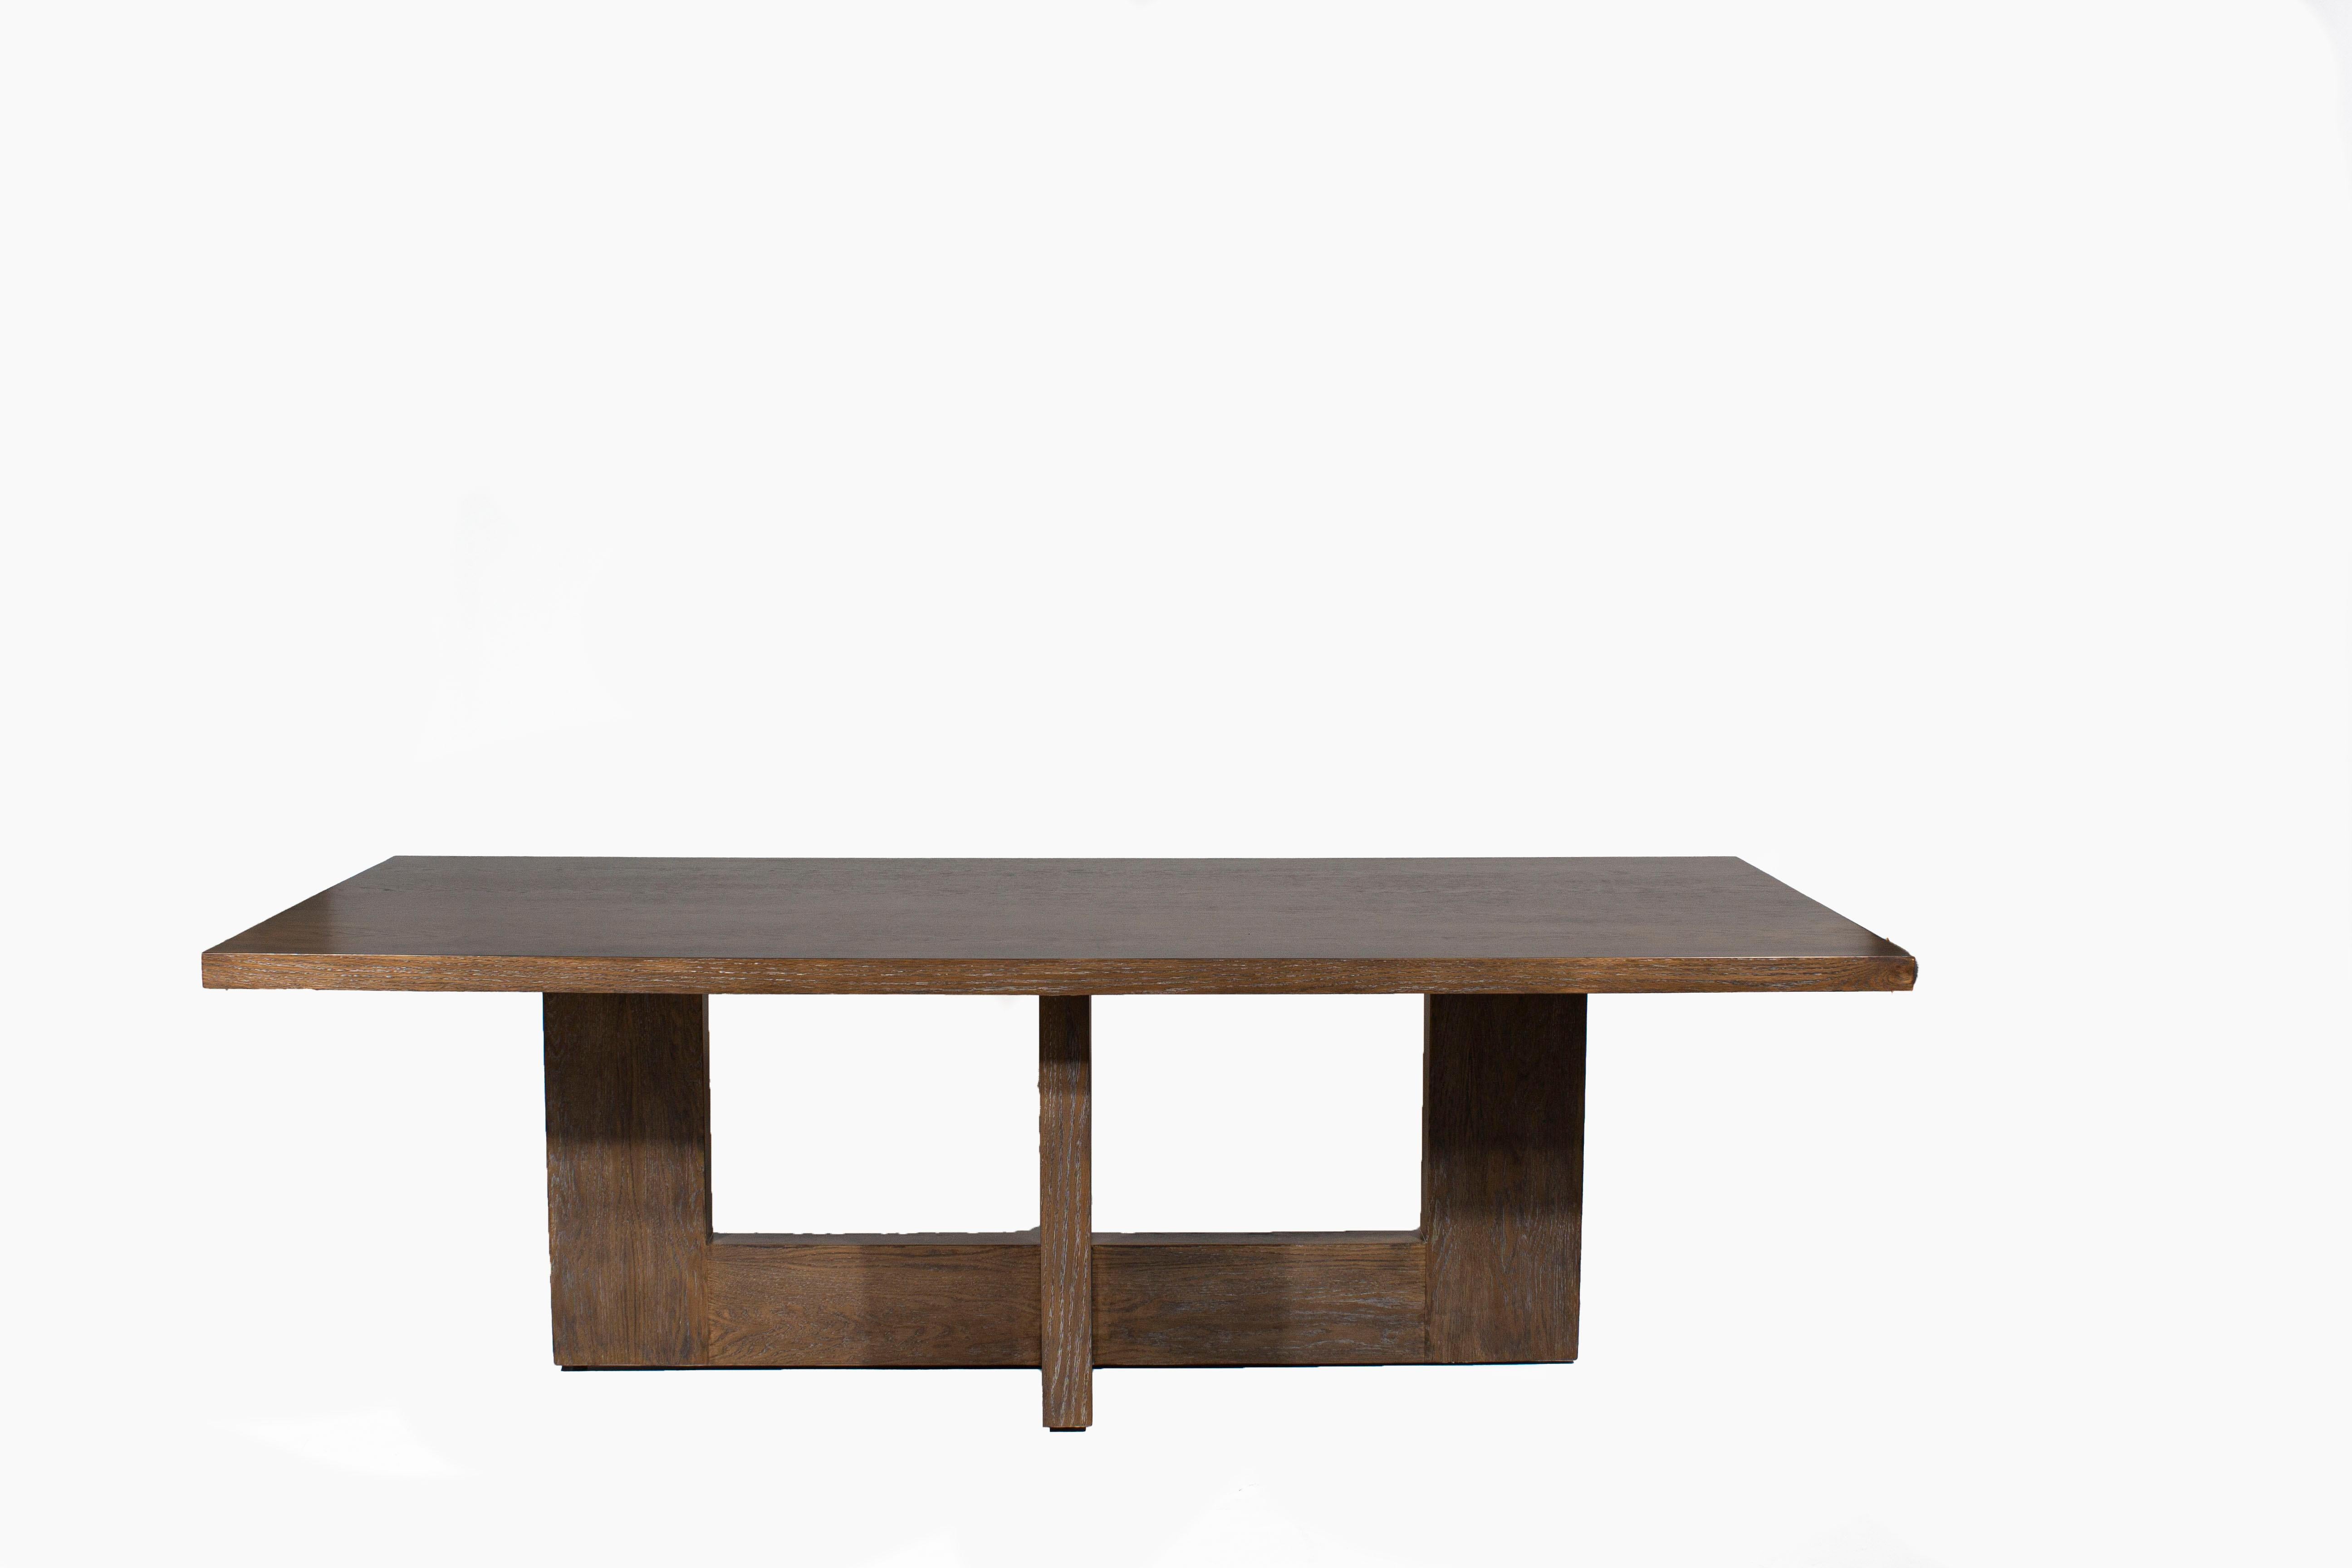 Modernist inspired dining table red oak

Designed by Brendan Bass and crafted by local artisans in the Dallas Design District.

Modern wood dining room table with geometric base.